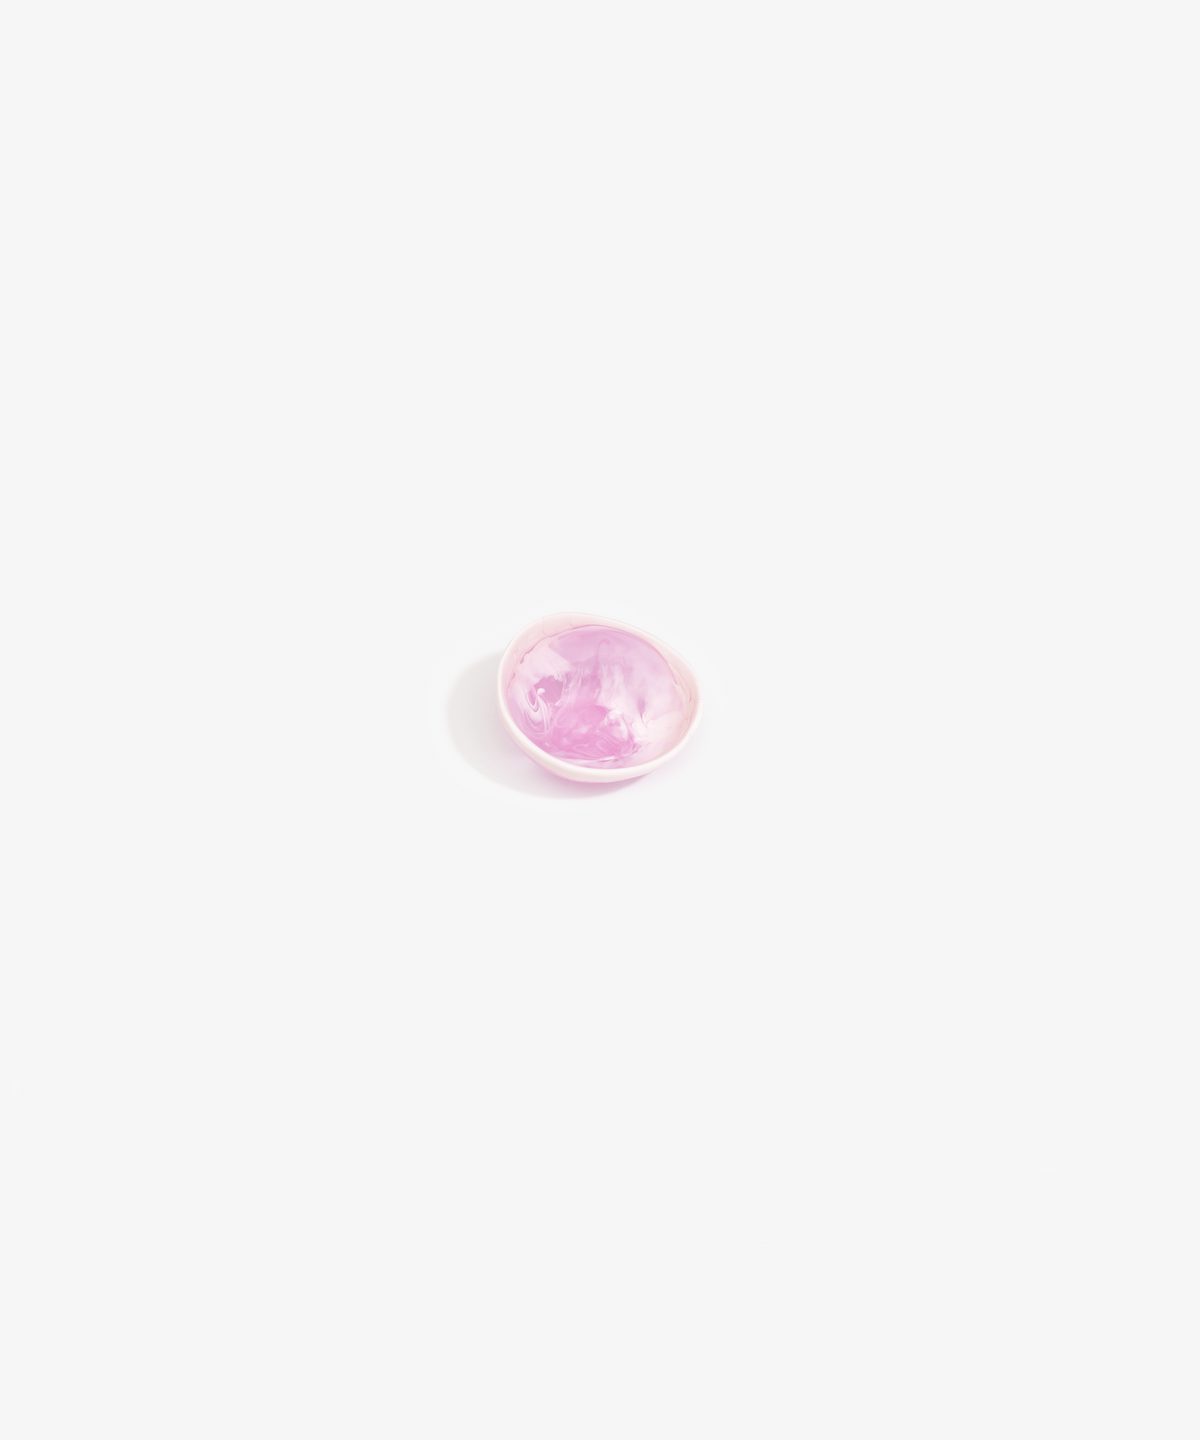 Resin Flow Spice Dish - Shell Pink